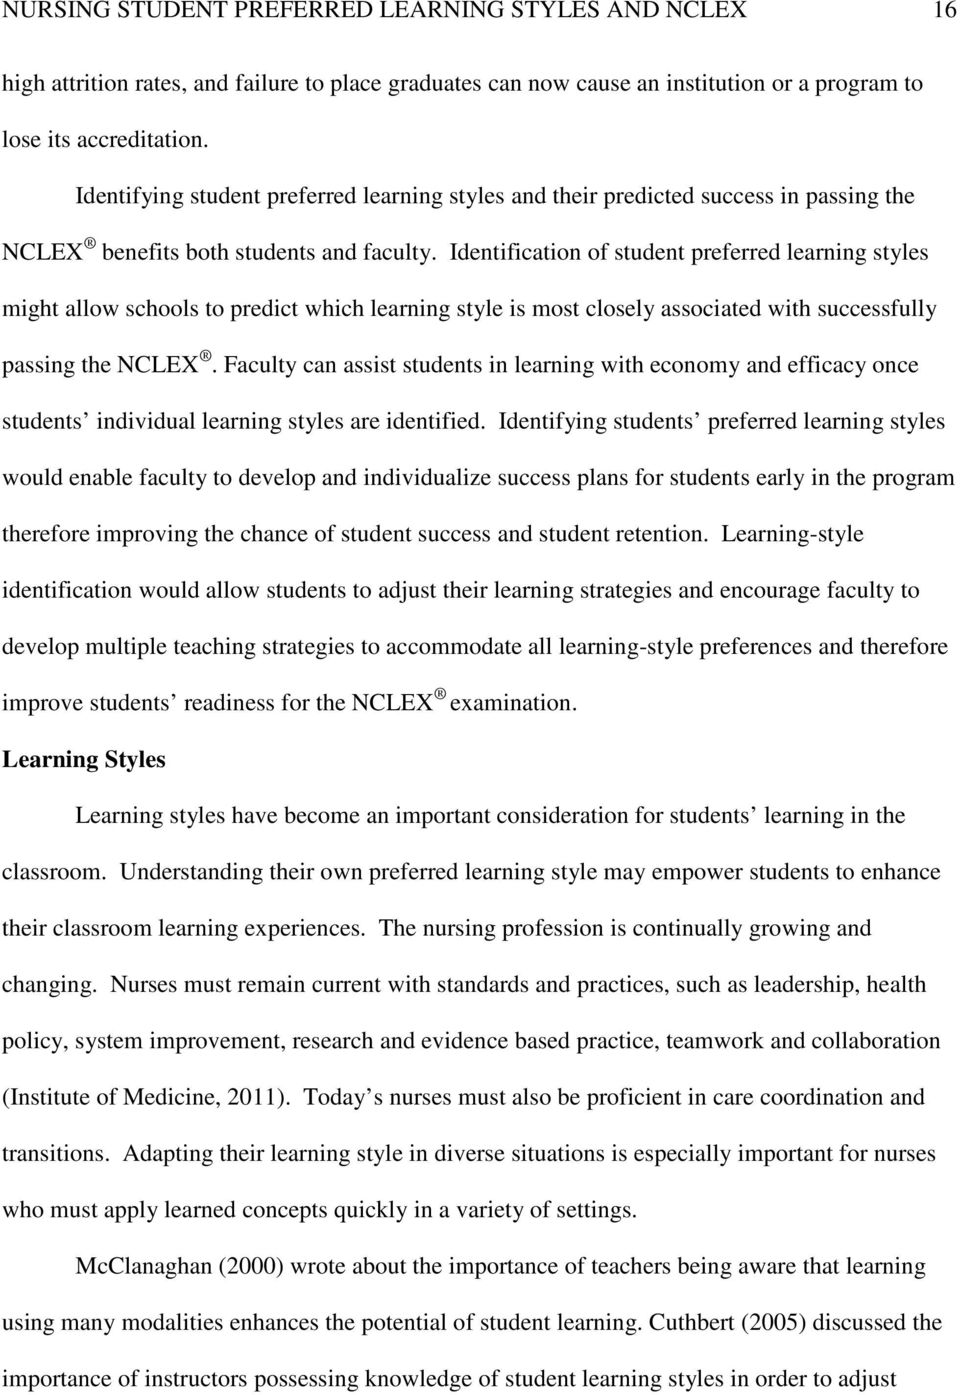 importance of learning styles to nursing student